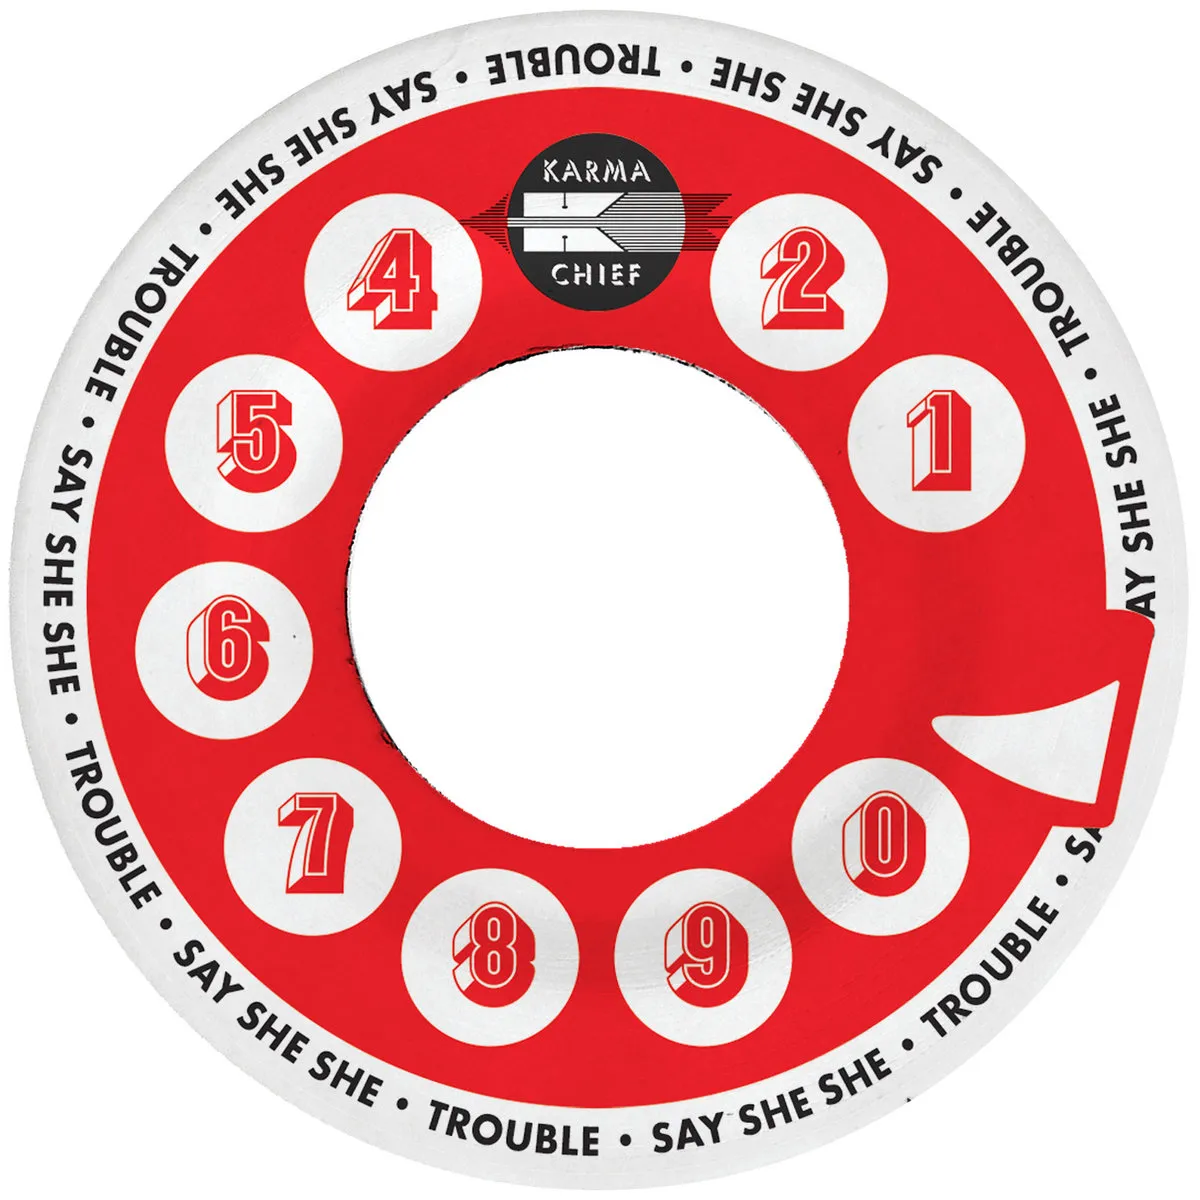 Say She She - Trouble / In My Head : 7inch